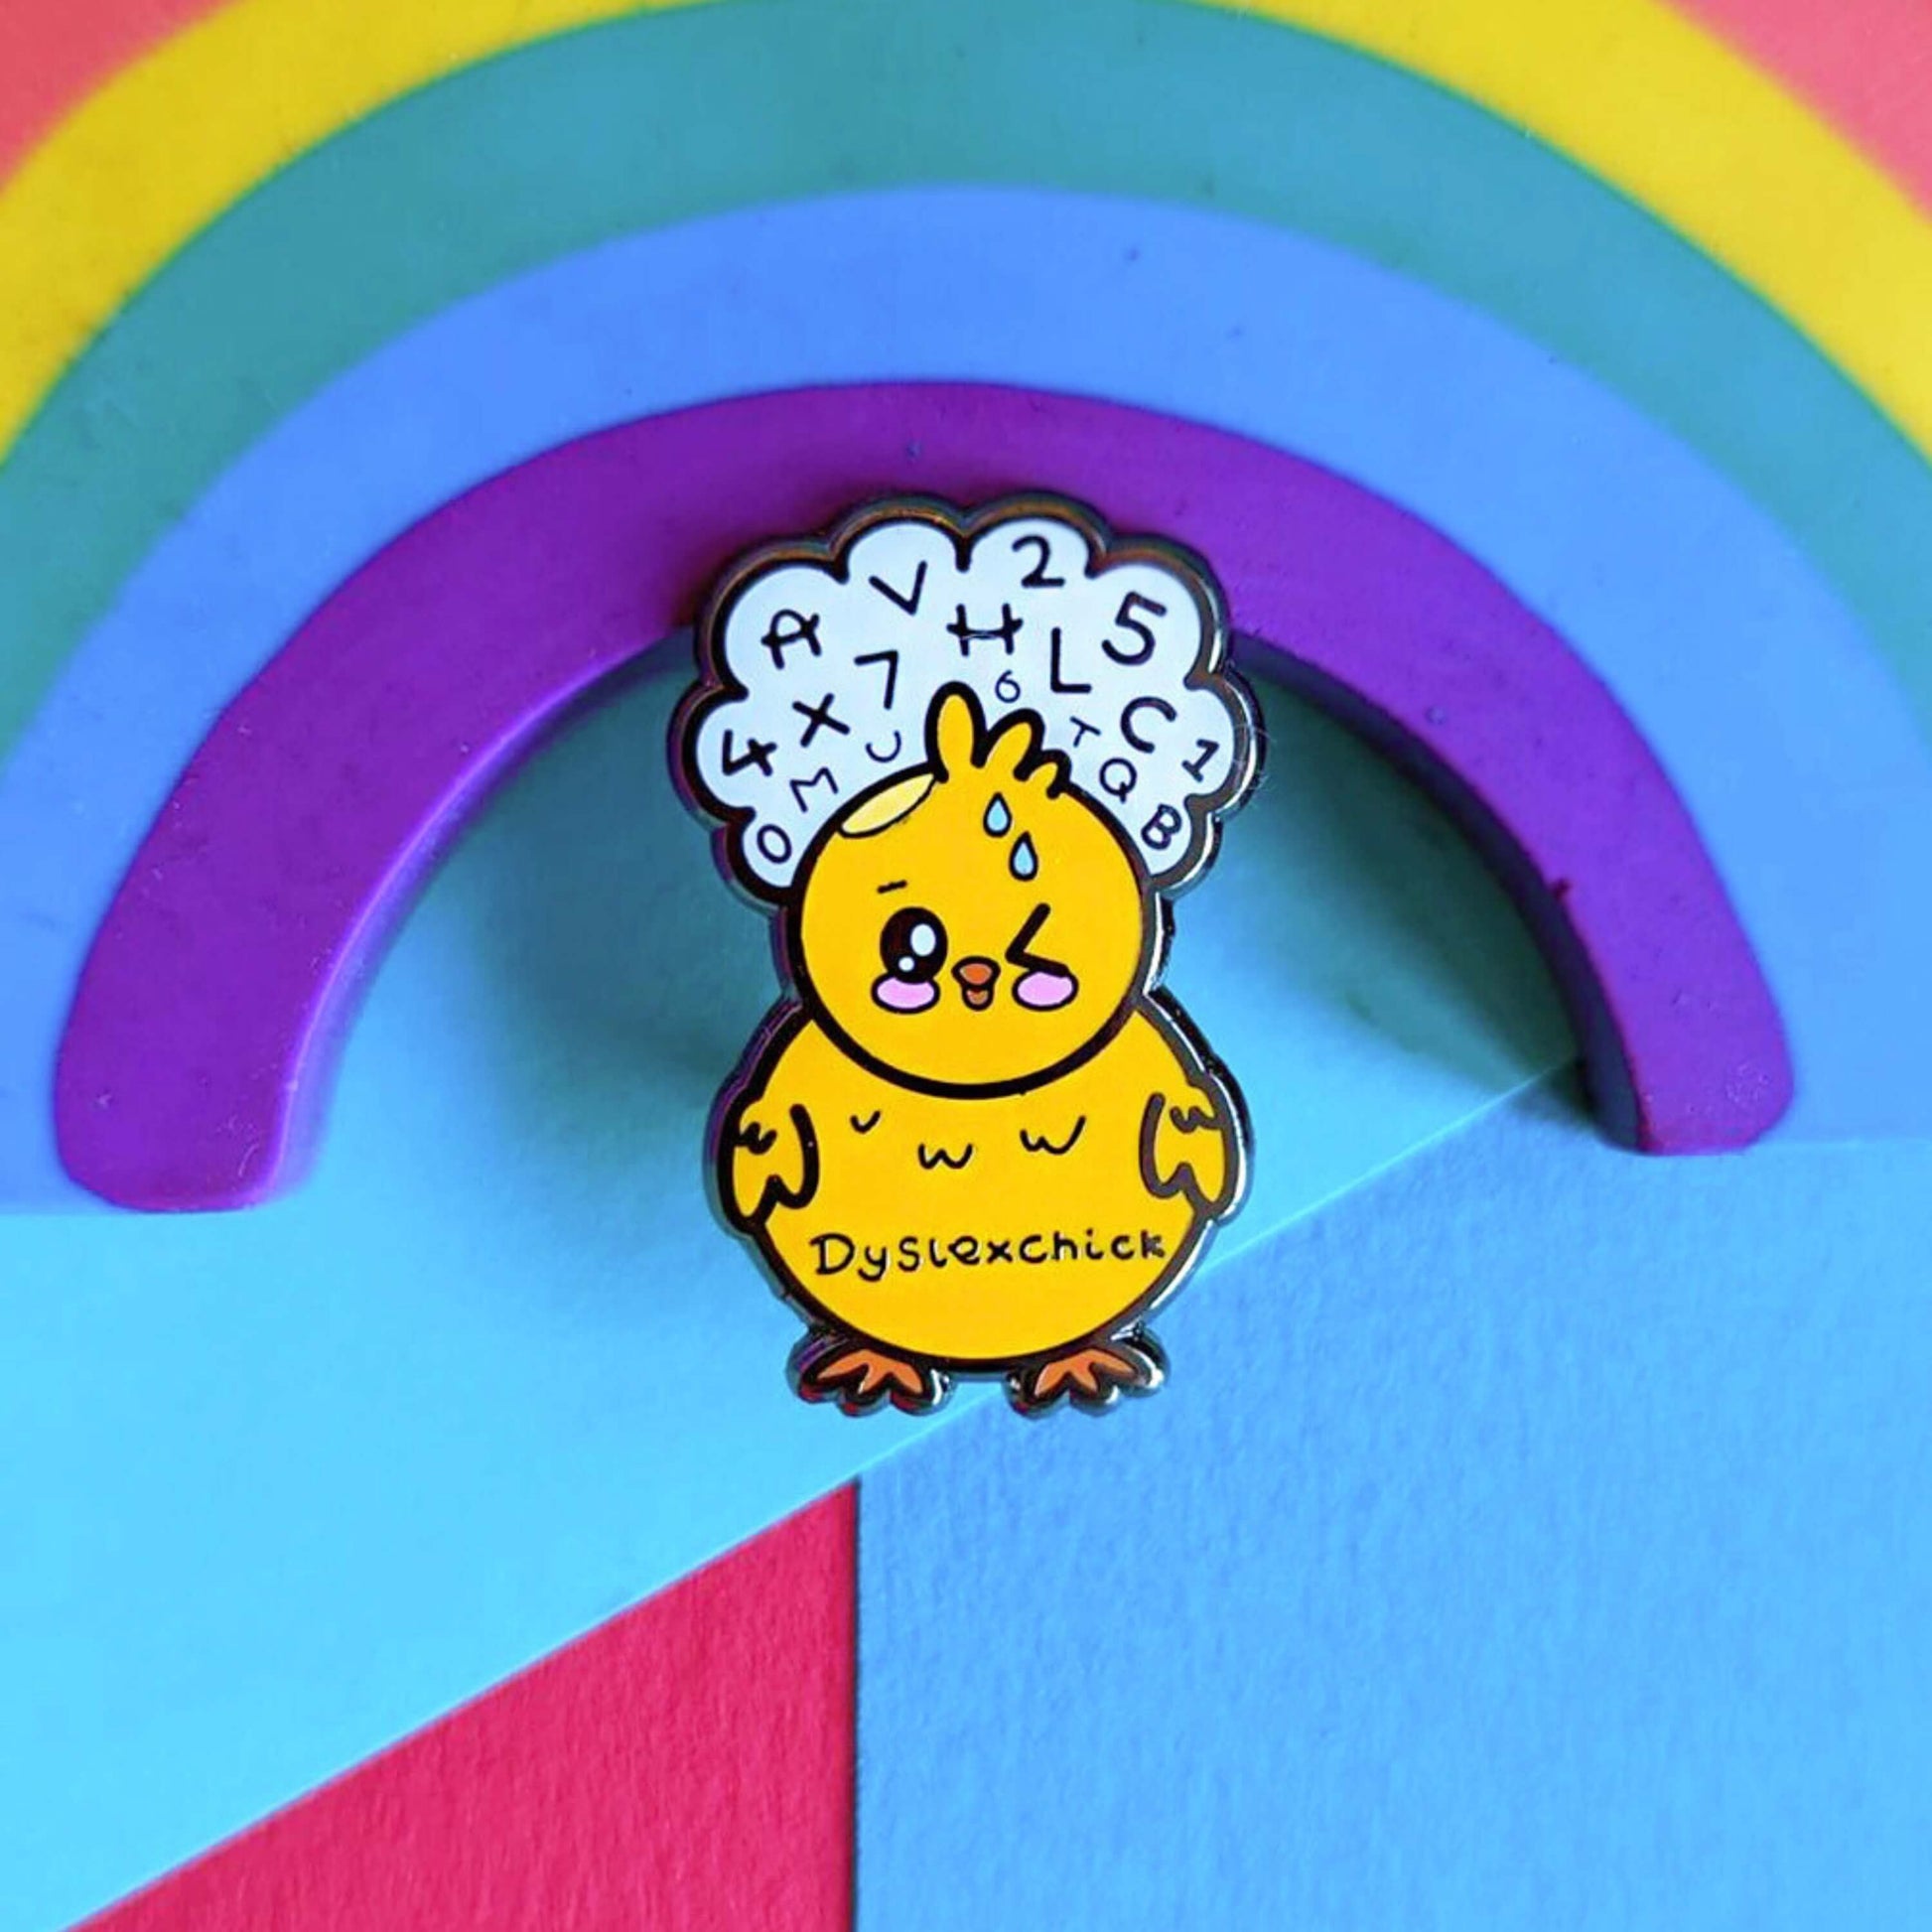 The Dyslexchick Enamel Pin - Dyslexia leaning on a rainbow on a blue background. A yellow confused chick shaped pin badge with a thought bubble above its head full of letters and numbers with 'dyslexchick' written across its middle. The hand drawn design is raising awareness for dyslexia.